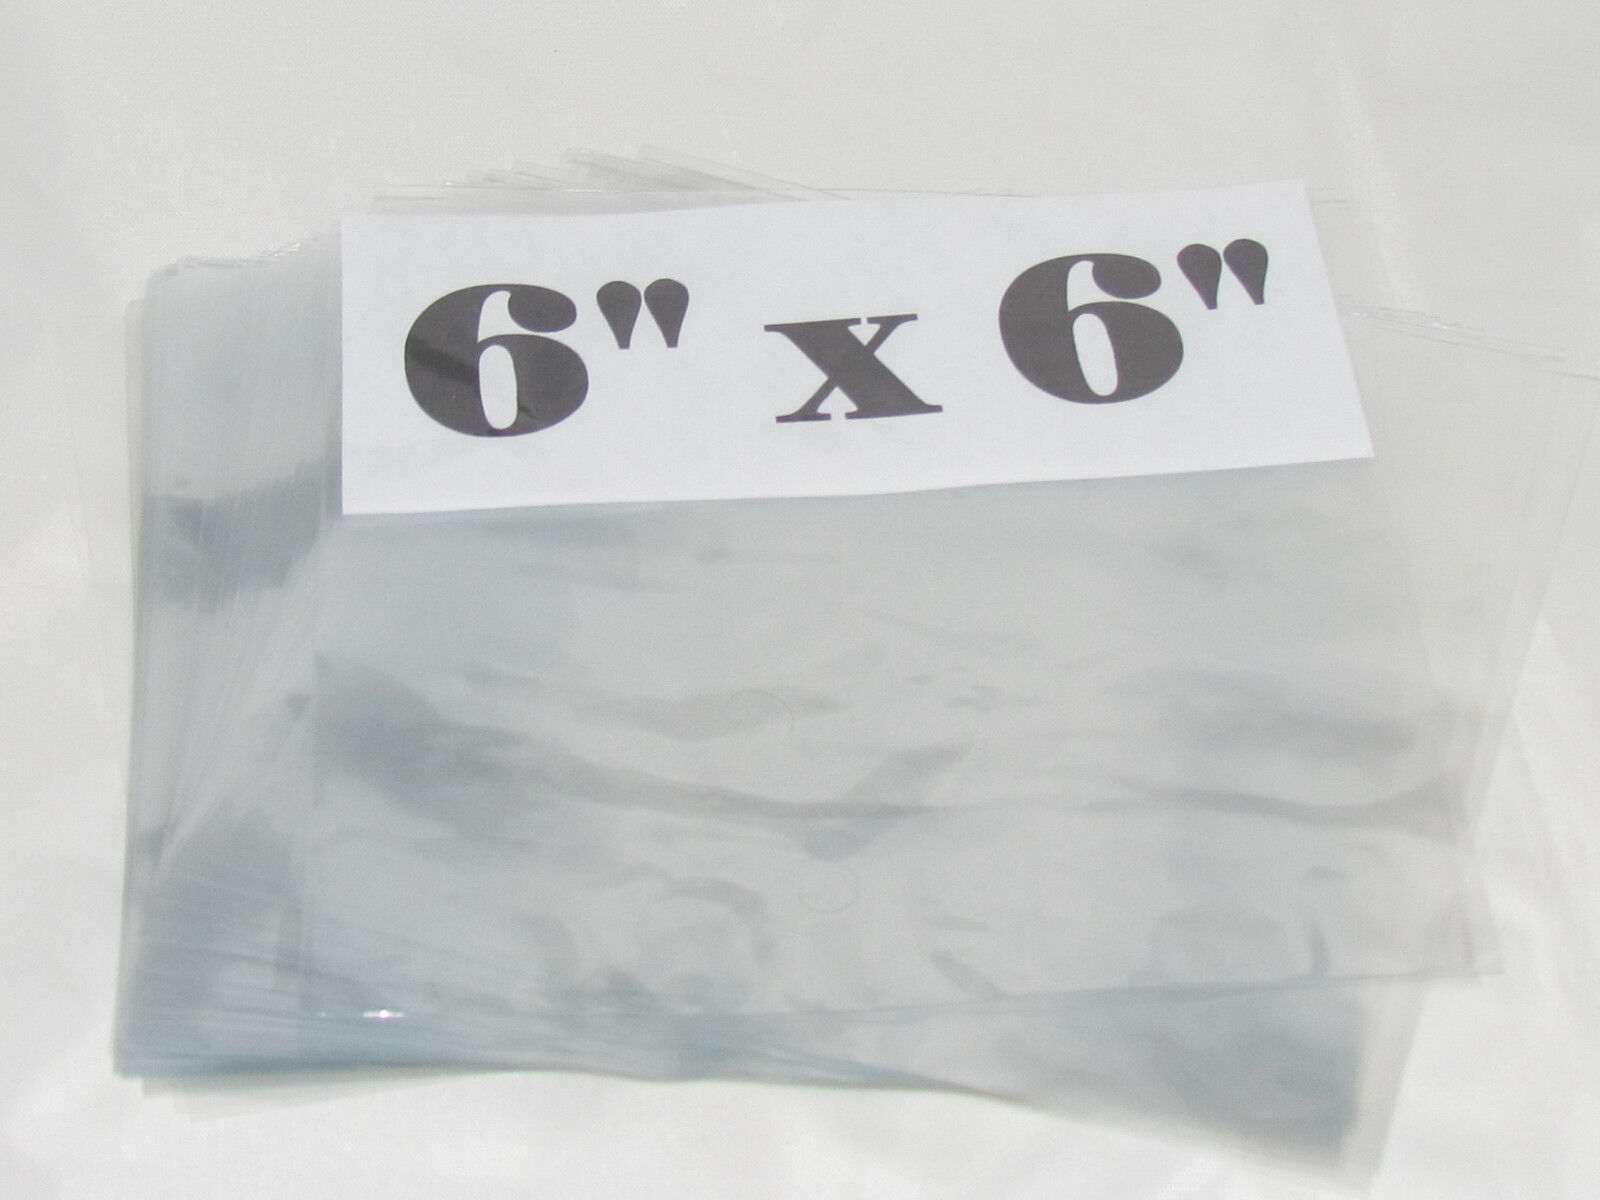 Lot of 500 Pieces Heat Shrink Wrap Film Flat Bags 6x6 Candles PVC 6" x 6"     PolySender Does Not Apply - фотография #5